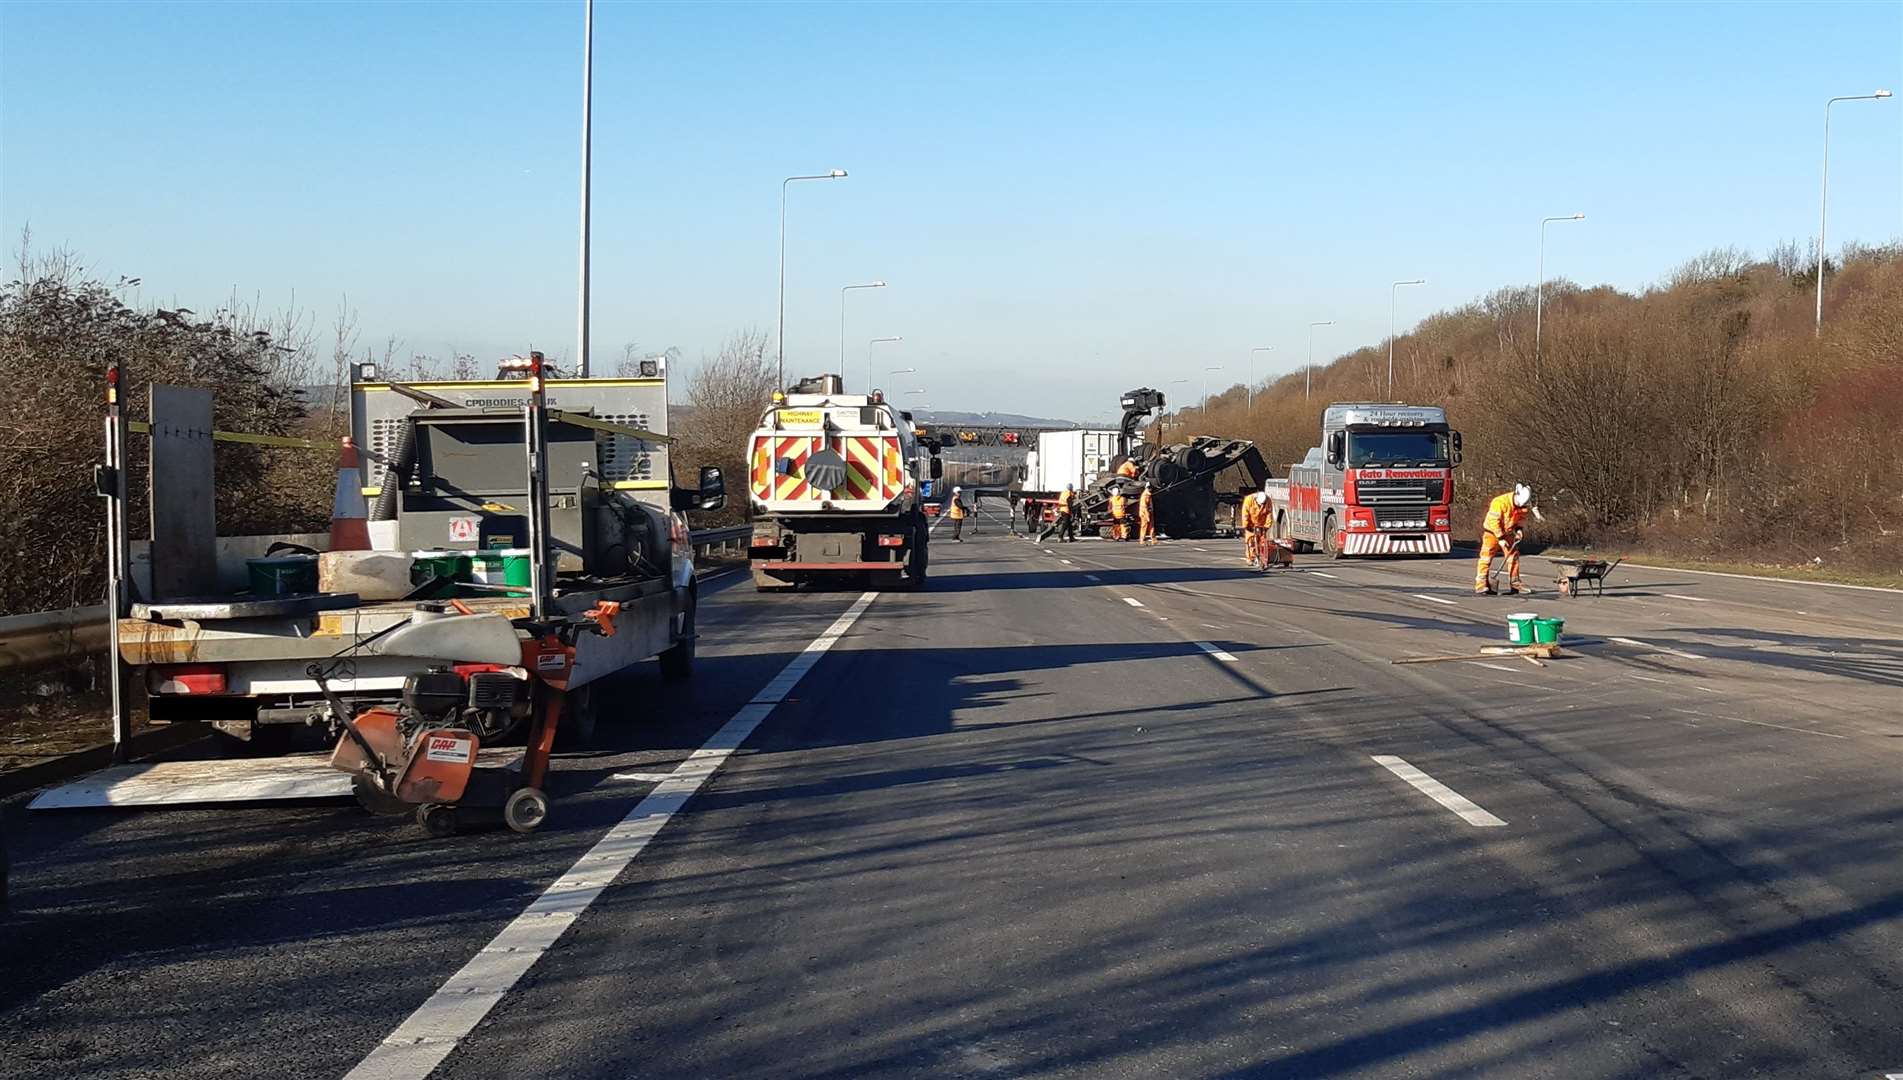 Clearance teams are removing parts of the wrecked trailer from the M2. Picture: Highways England (28524786)